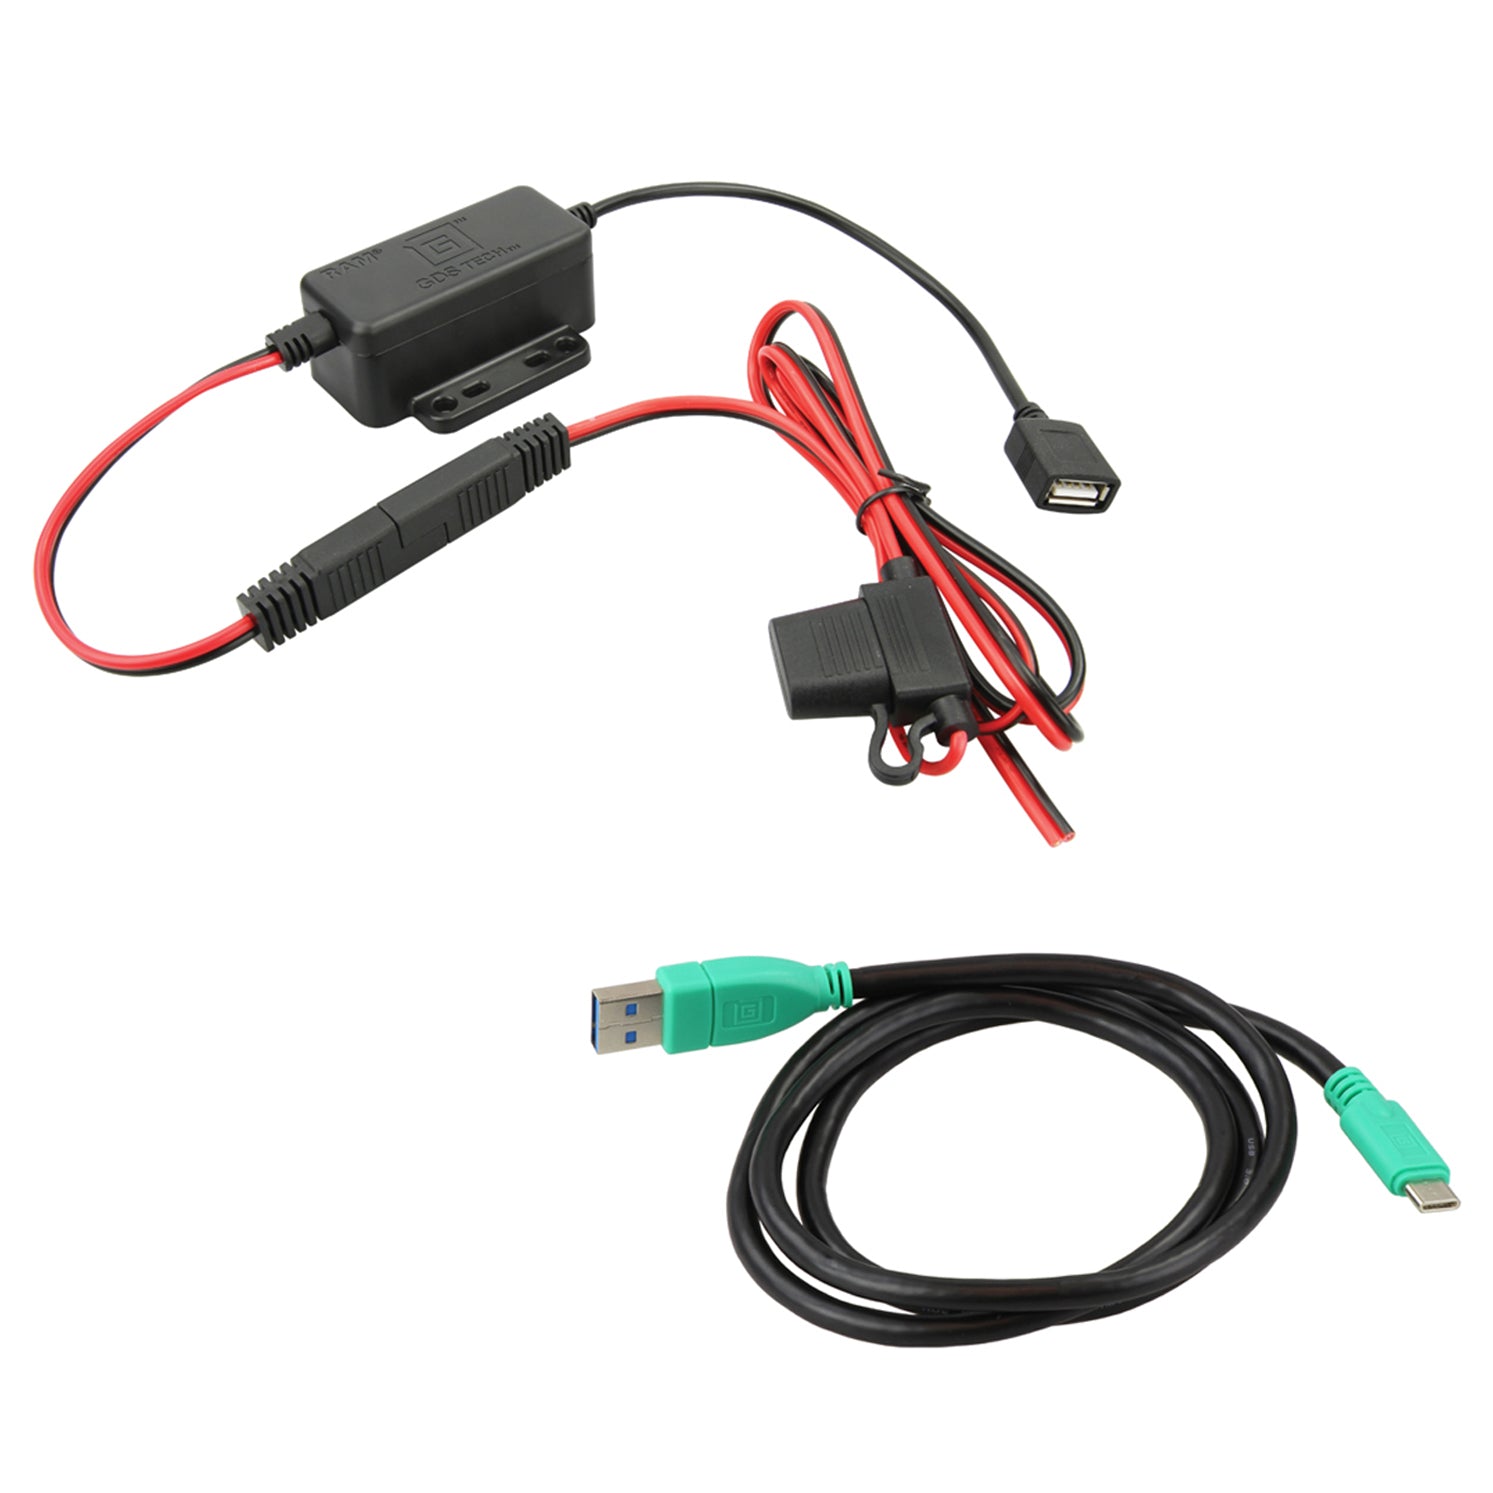 Ram Mount GDS Modular 30-64V Hardwire Charger with Type-C Cable